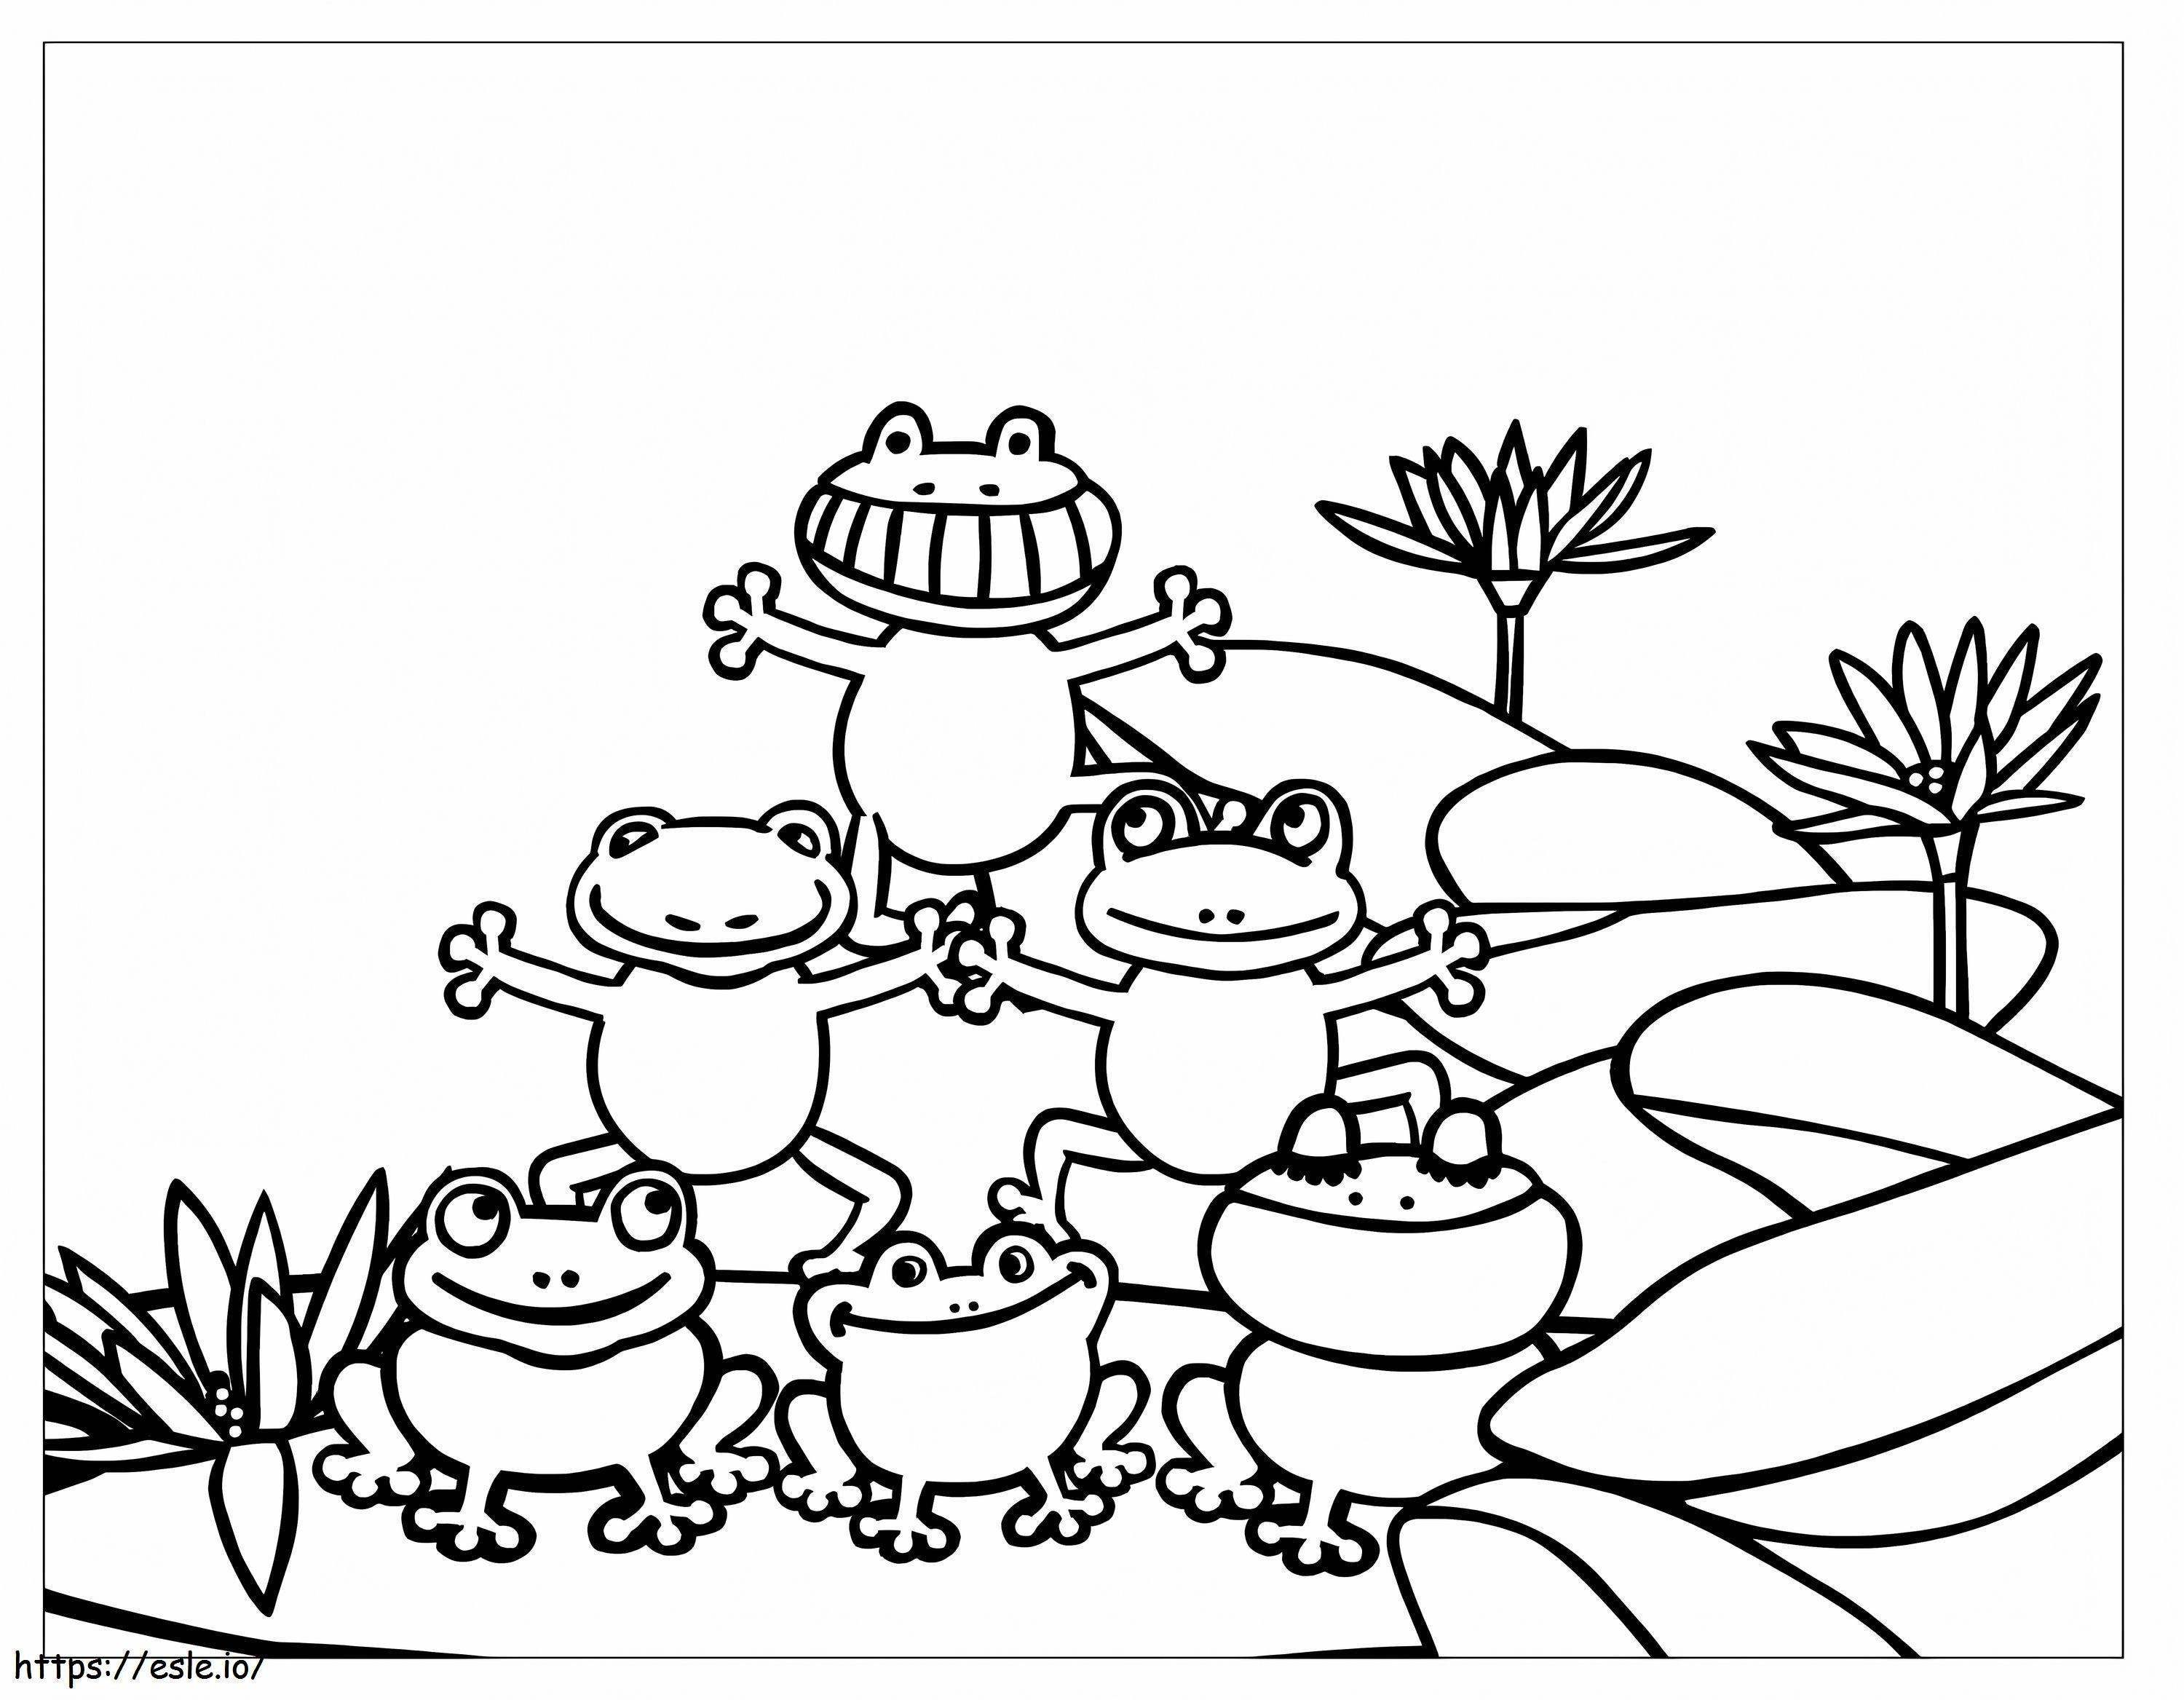 Six Frogs coloring page